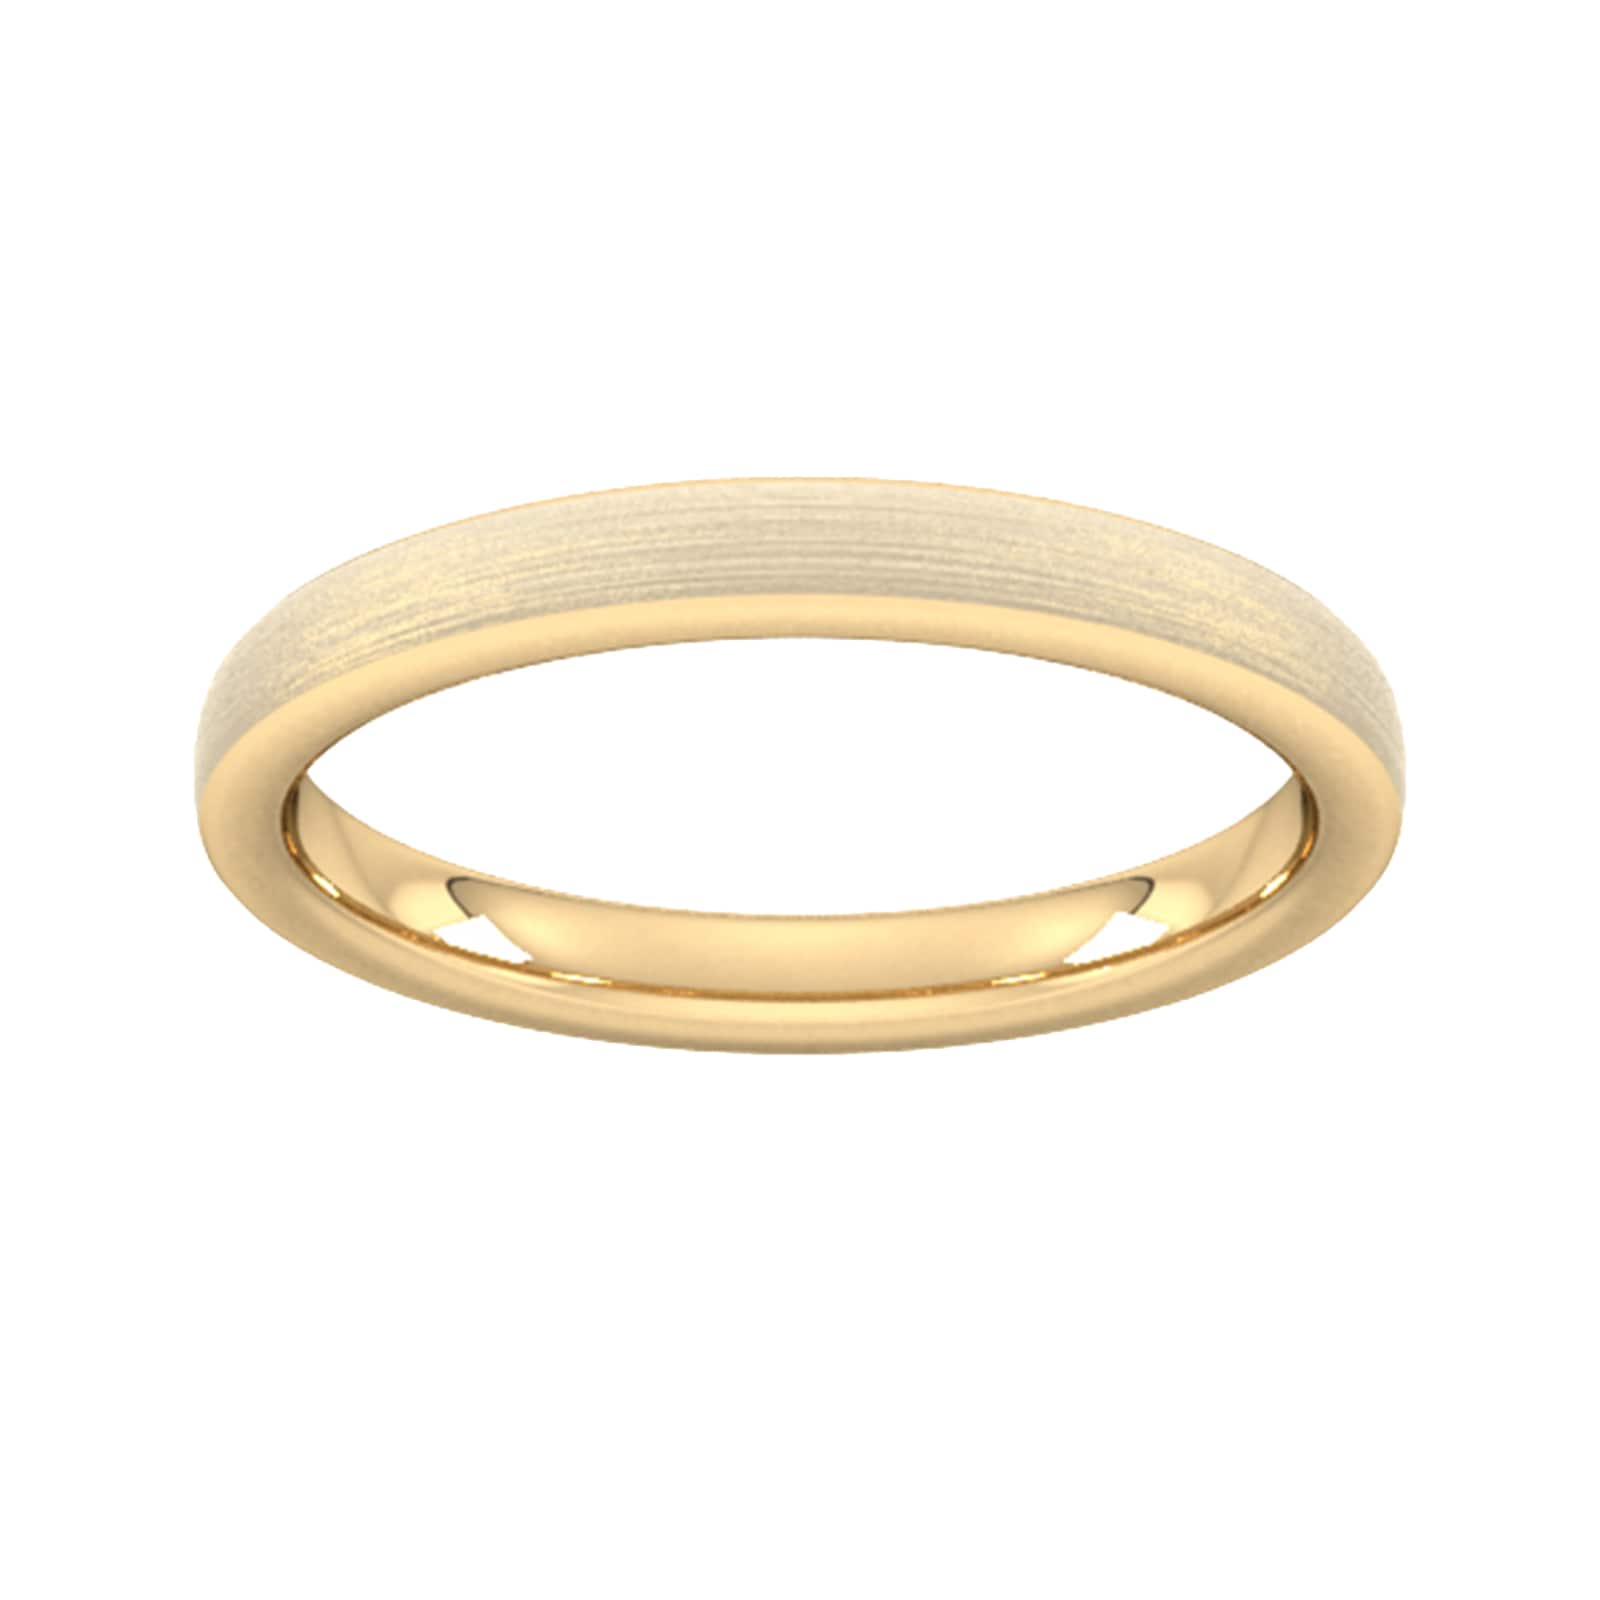 2.5mm Slight Court Extra Heavy Polished Chamfered Edges With Matt Centre Wedding Ring In 18 Carat Yellow Gold - Ring Size G